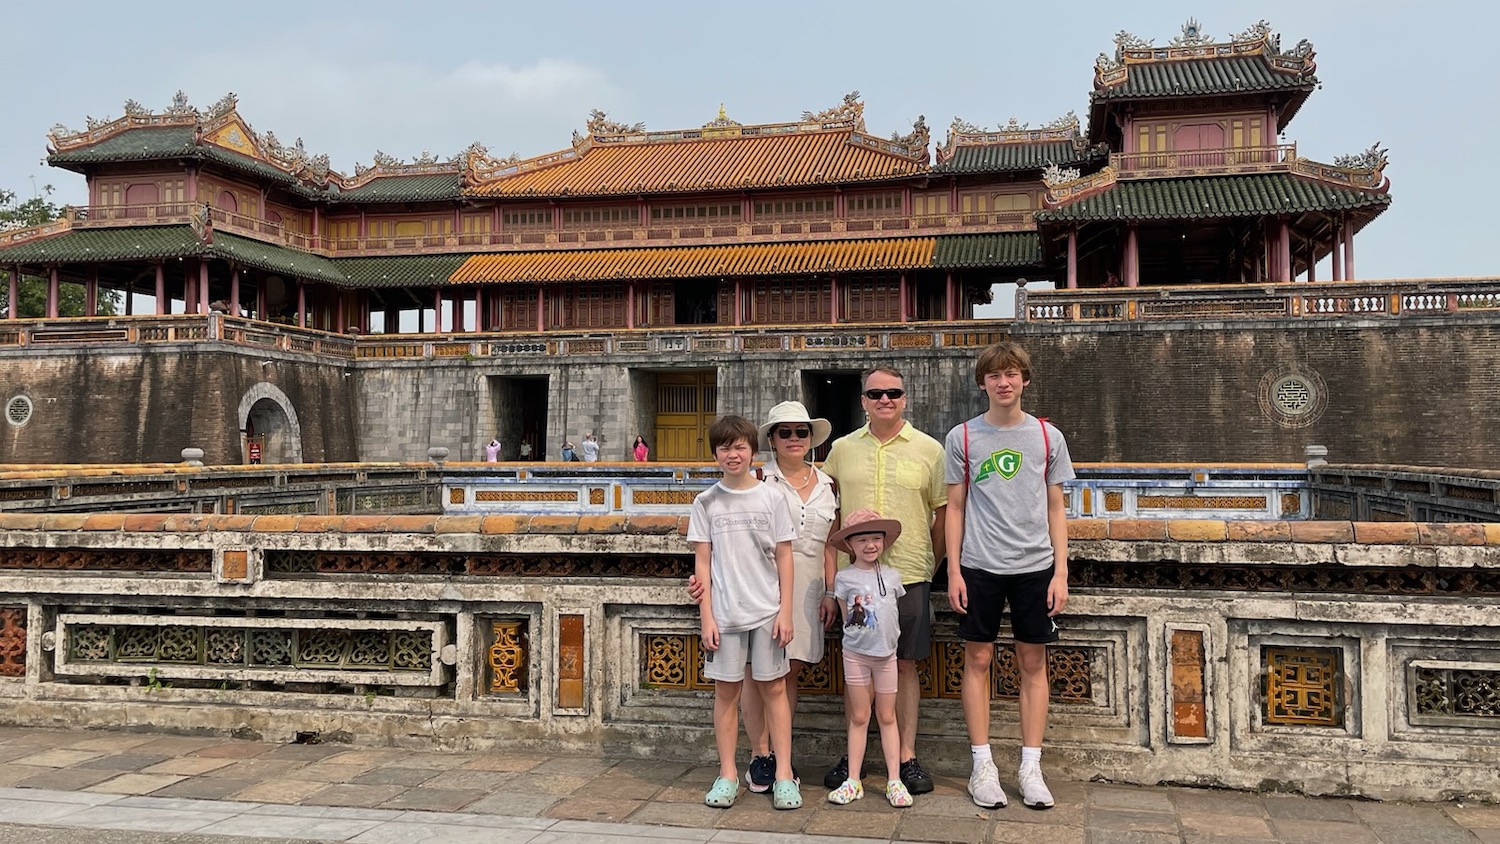 Charles Gaddy and his family in Vietnam on a recent trip. Photo provided.